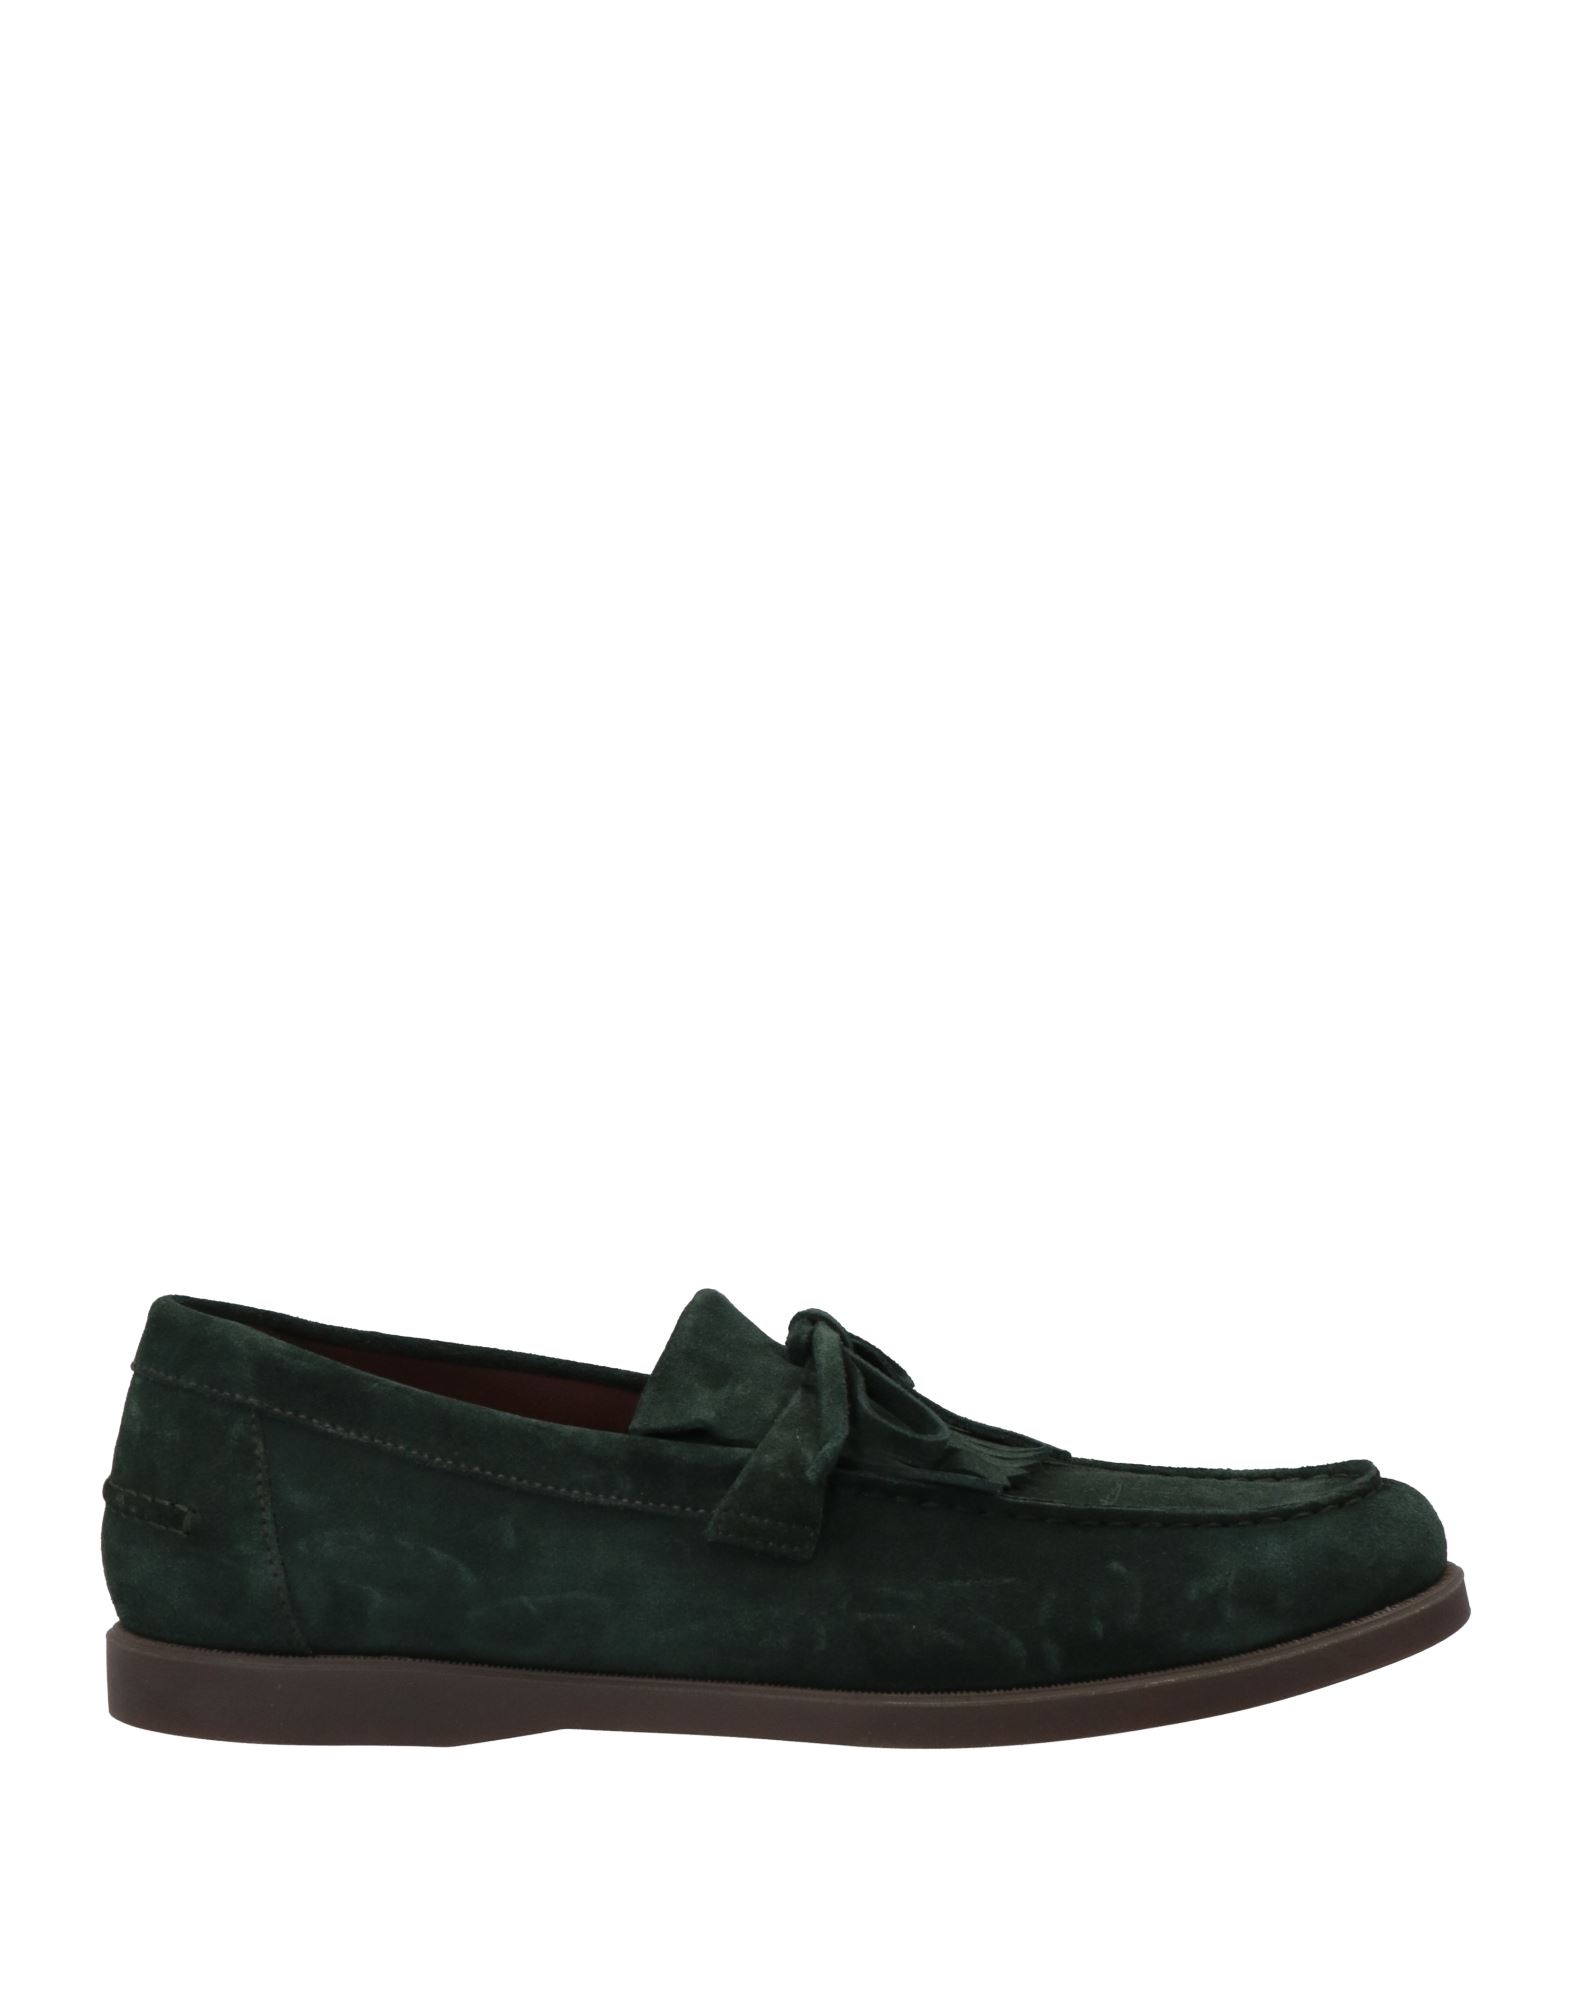 Doucal's Man Loafers Dark Green Size 7 Soft Leather